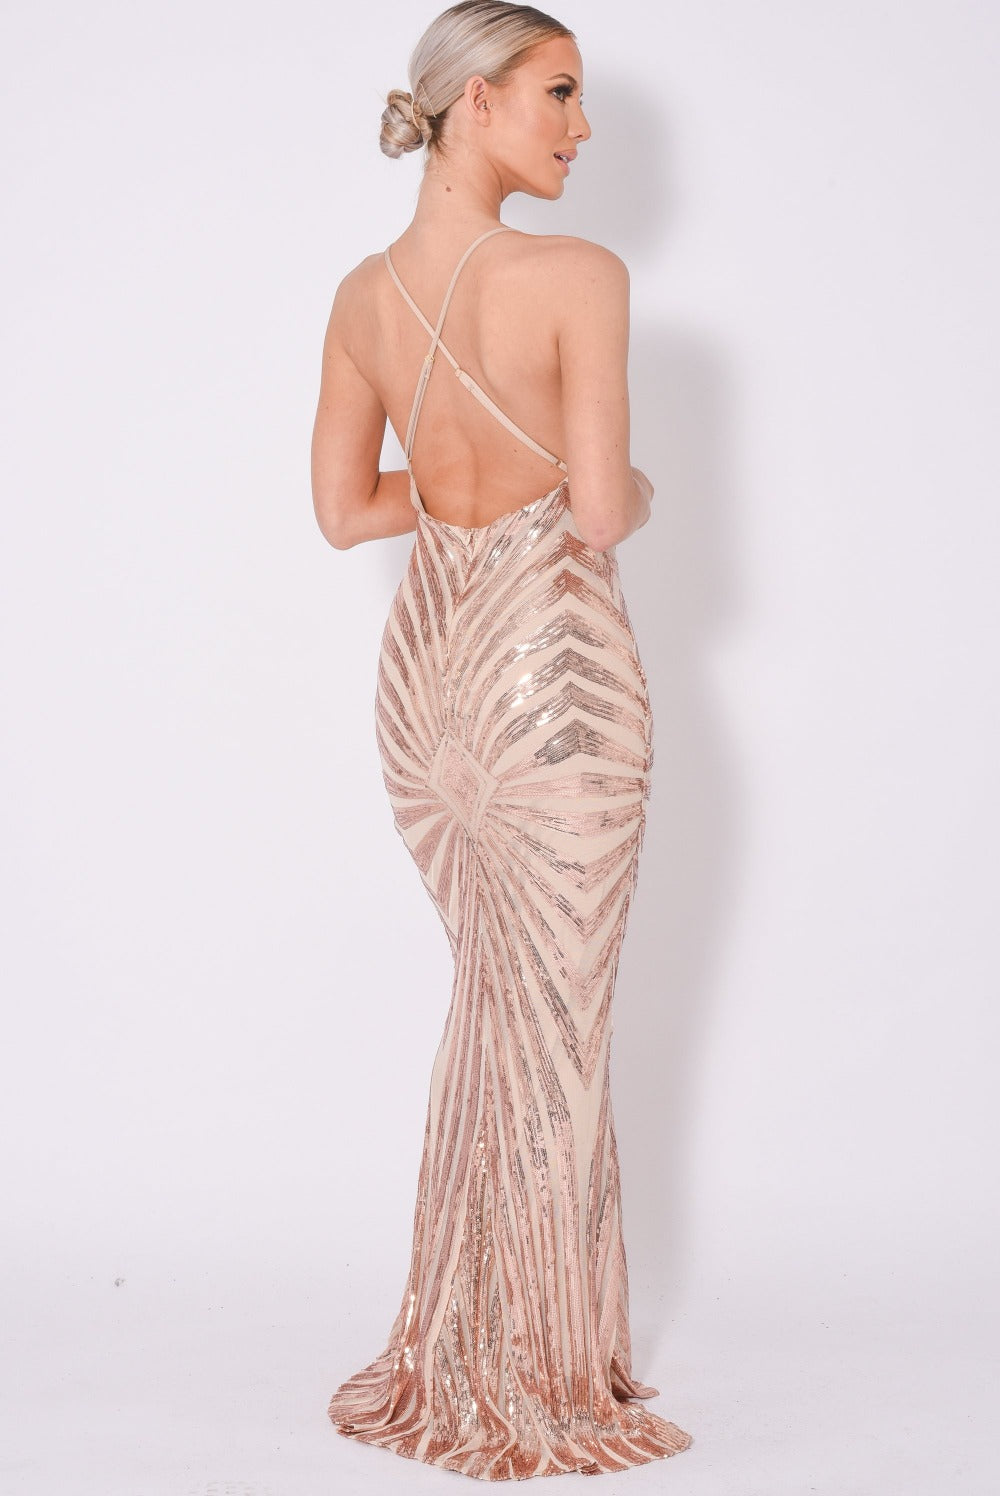 Timeless Rose Gold Plunge Sequin Hourglass Illusion Mermaid Maxi Dress